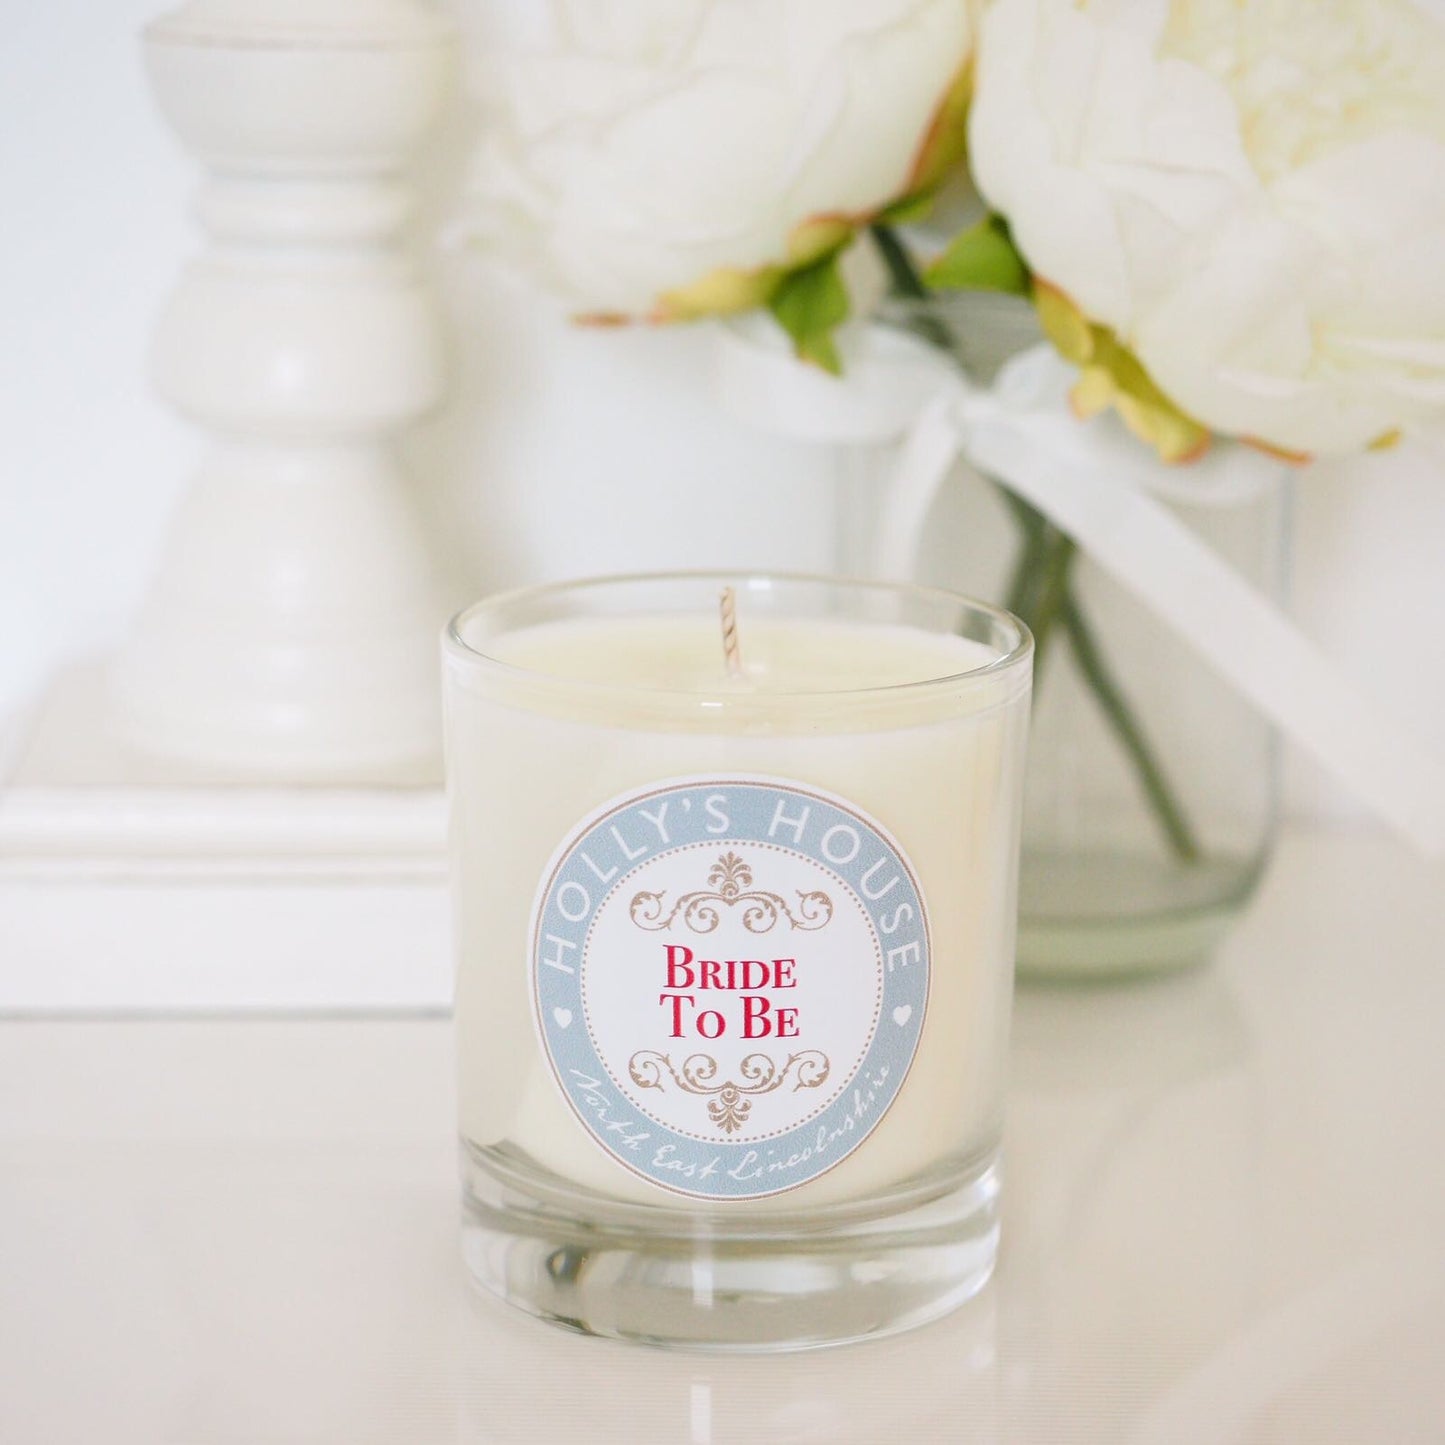 Strudel & Spice Luxury Scented Candle